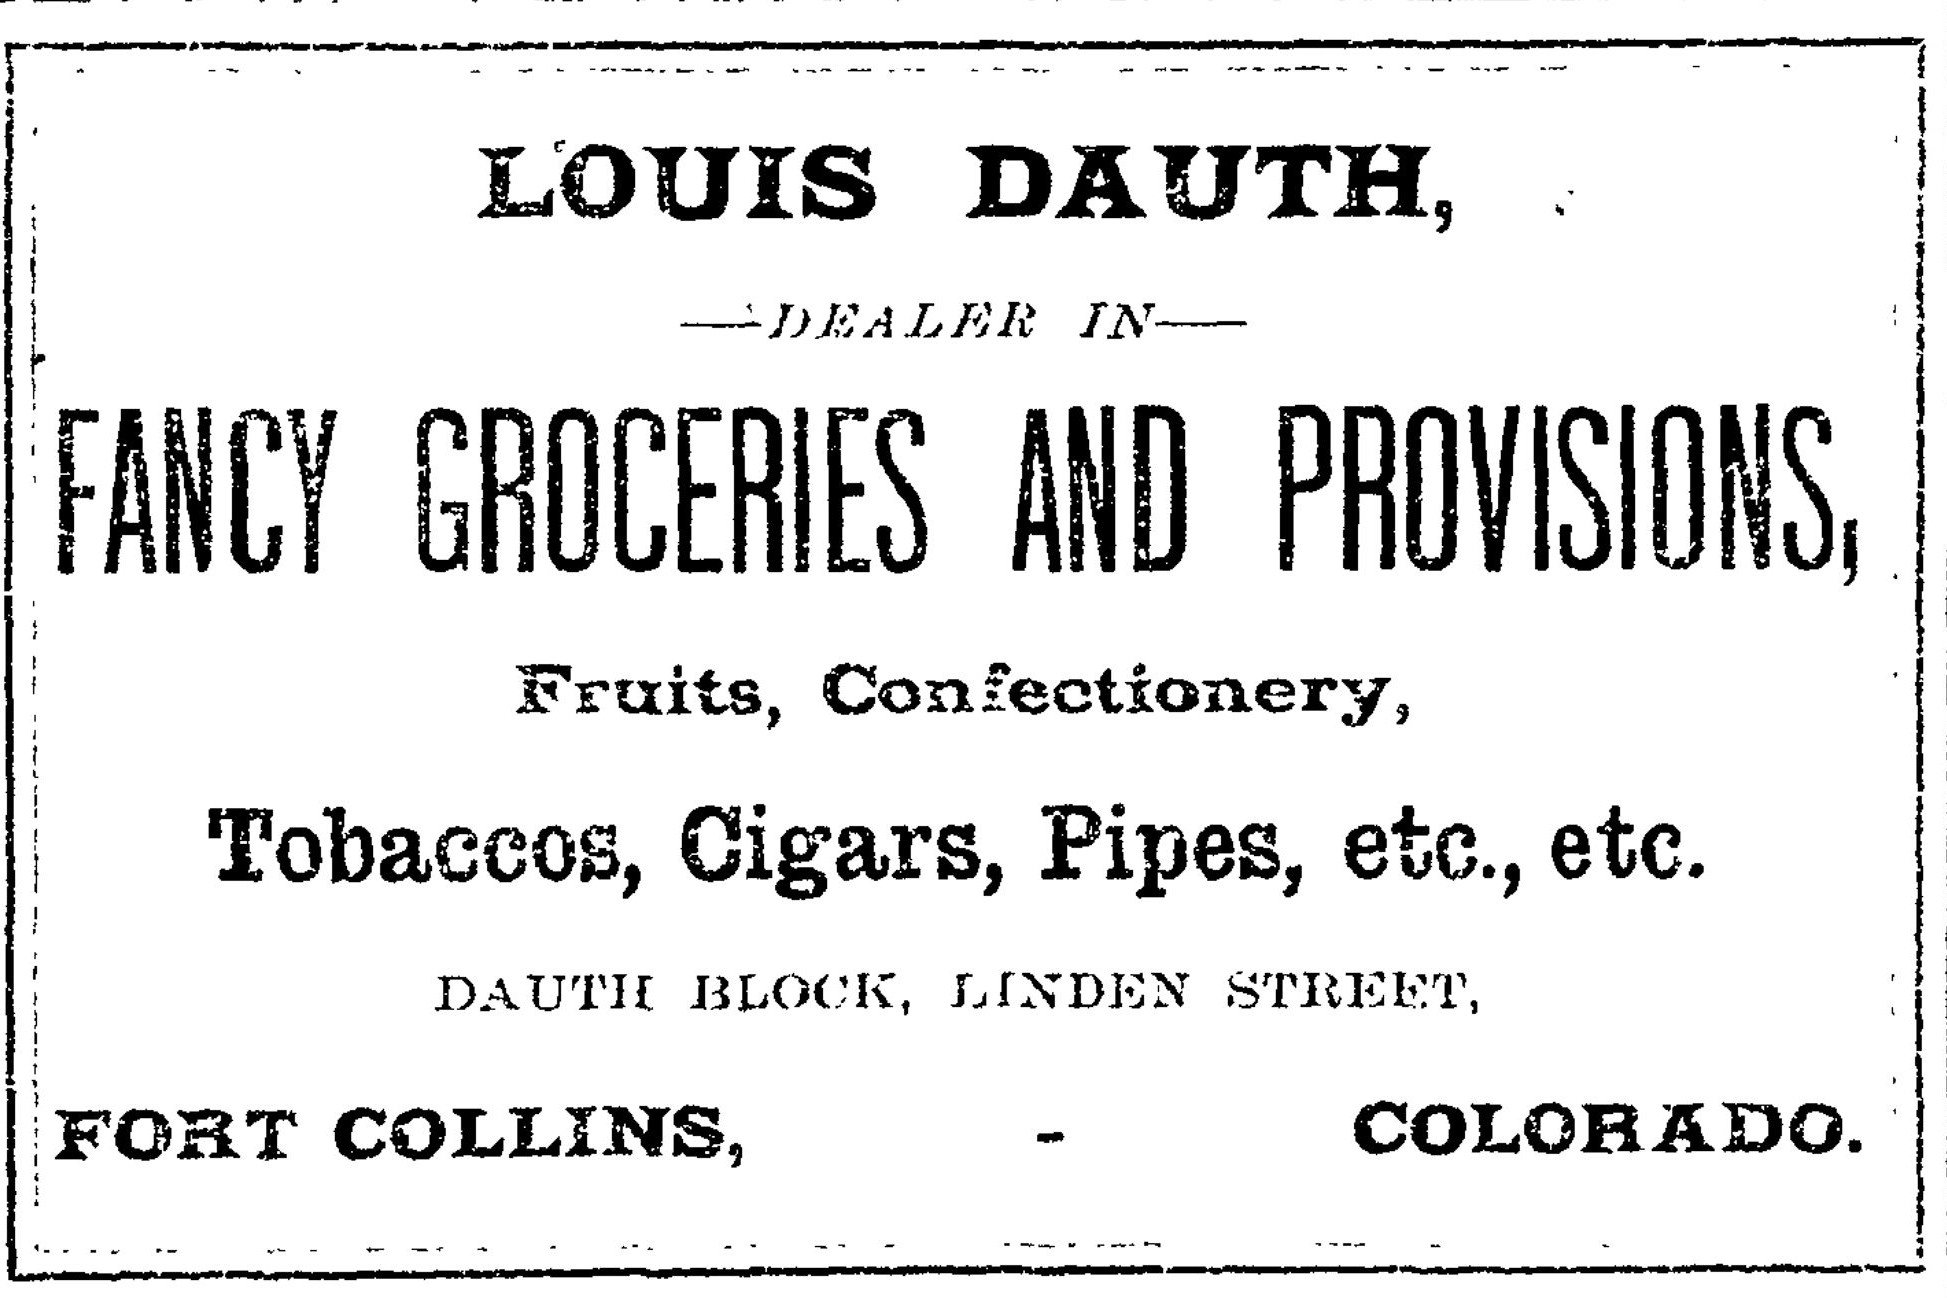 Dauth Family Archive - 1883-06-14 - Fort Collins Courier - Louis Dauth Fancy Groceries and Provisions Advertisement